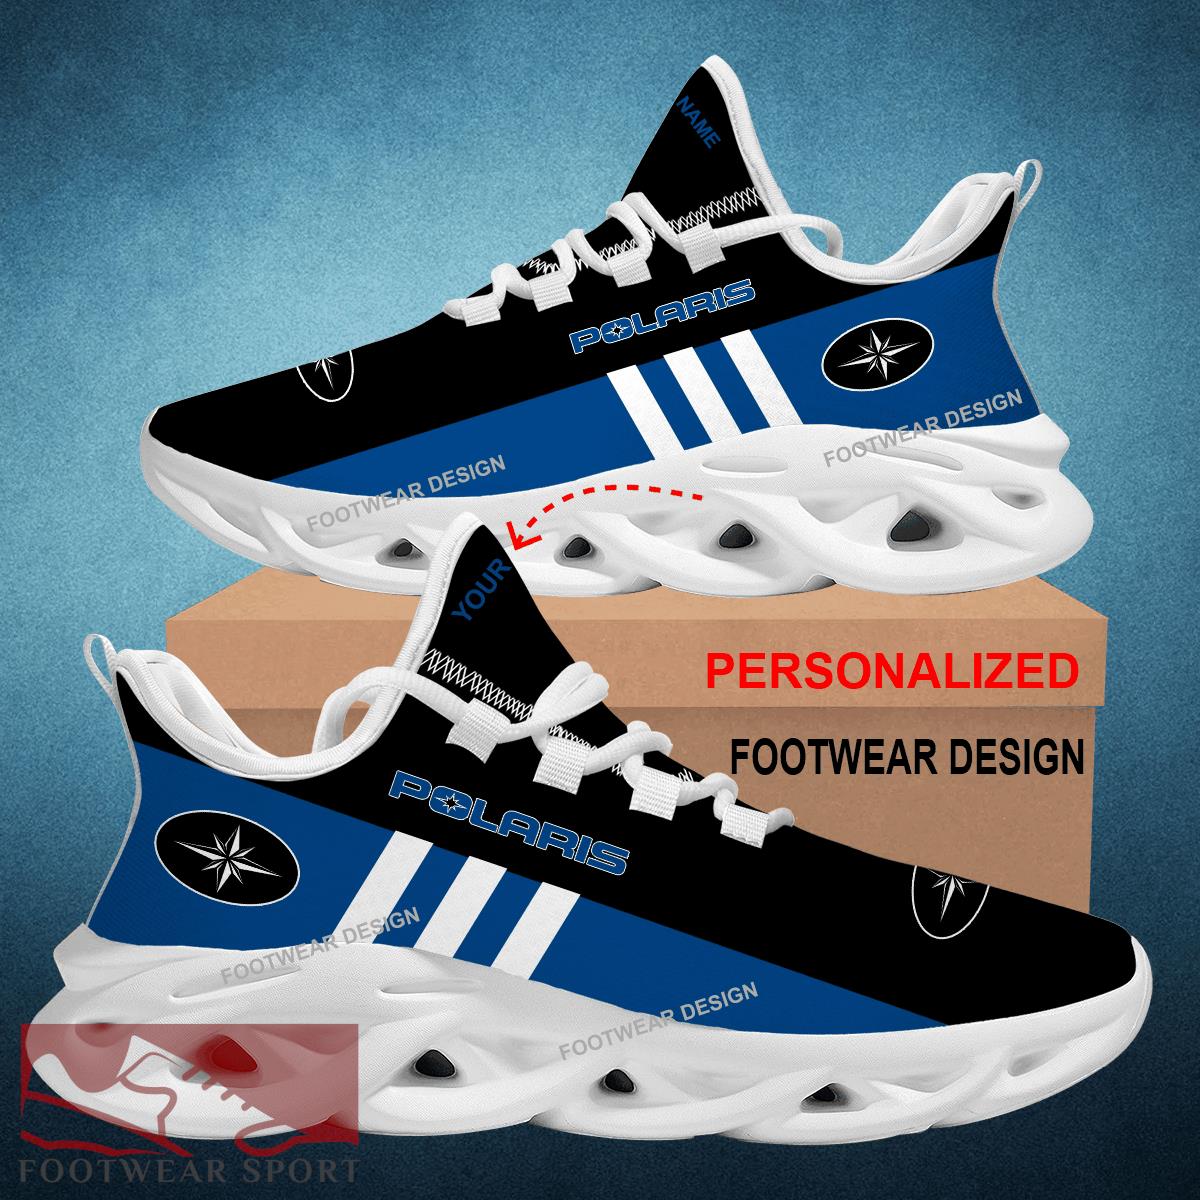 Car Racing Polaris Style Chunky Shoes New Design Gift Fans Max Soul Sneakers Personalized - Car Racing Polaris Logo New Style Chunky Shoes Photo 2